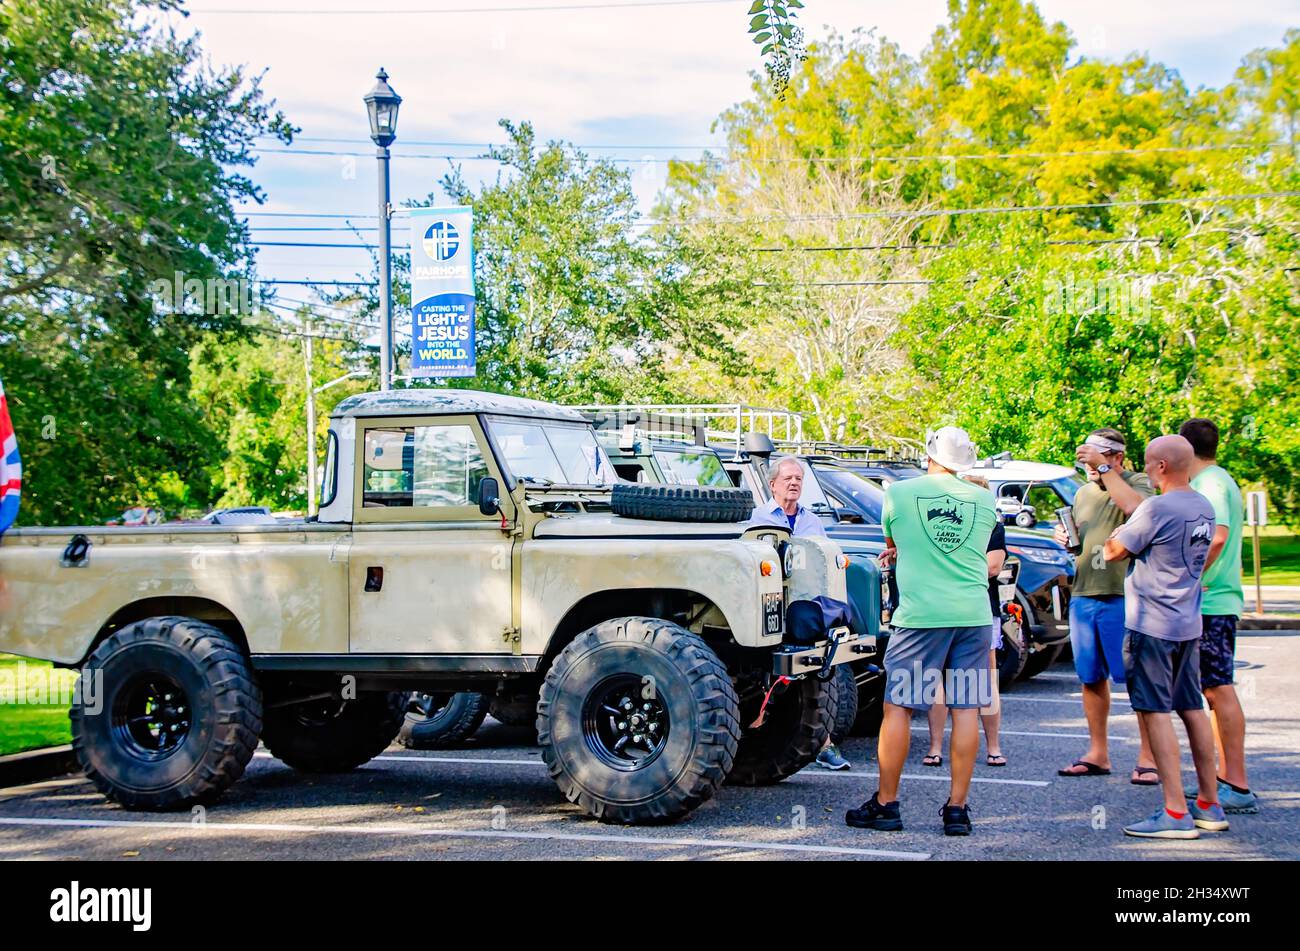 Car enthusiasts discuss a 1966 Land Rover Series IIA 109 two-door pickup at the 31st annual British Car Festival, Oct. 24, 2021, in Fairhope, Alabama. Stock Photo